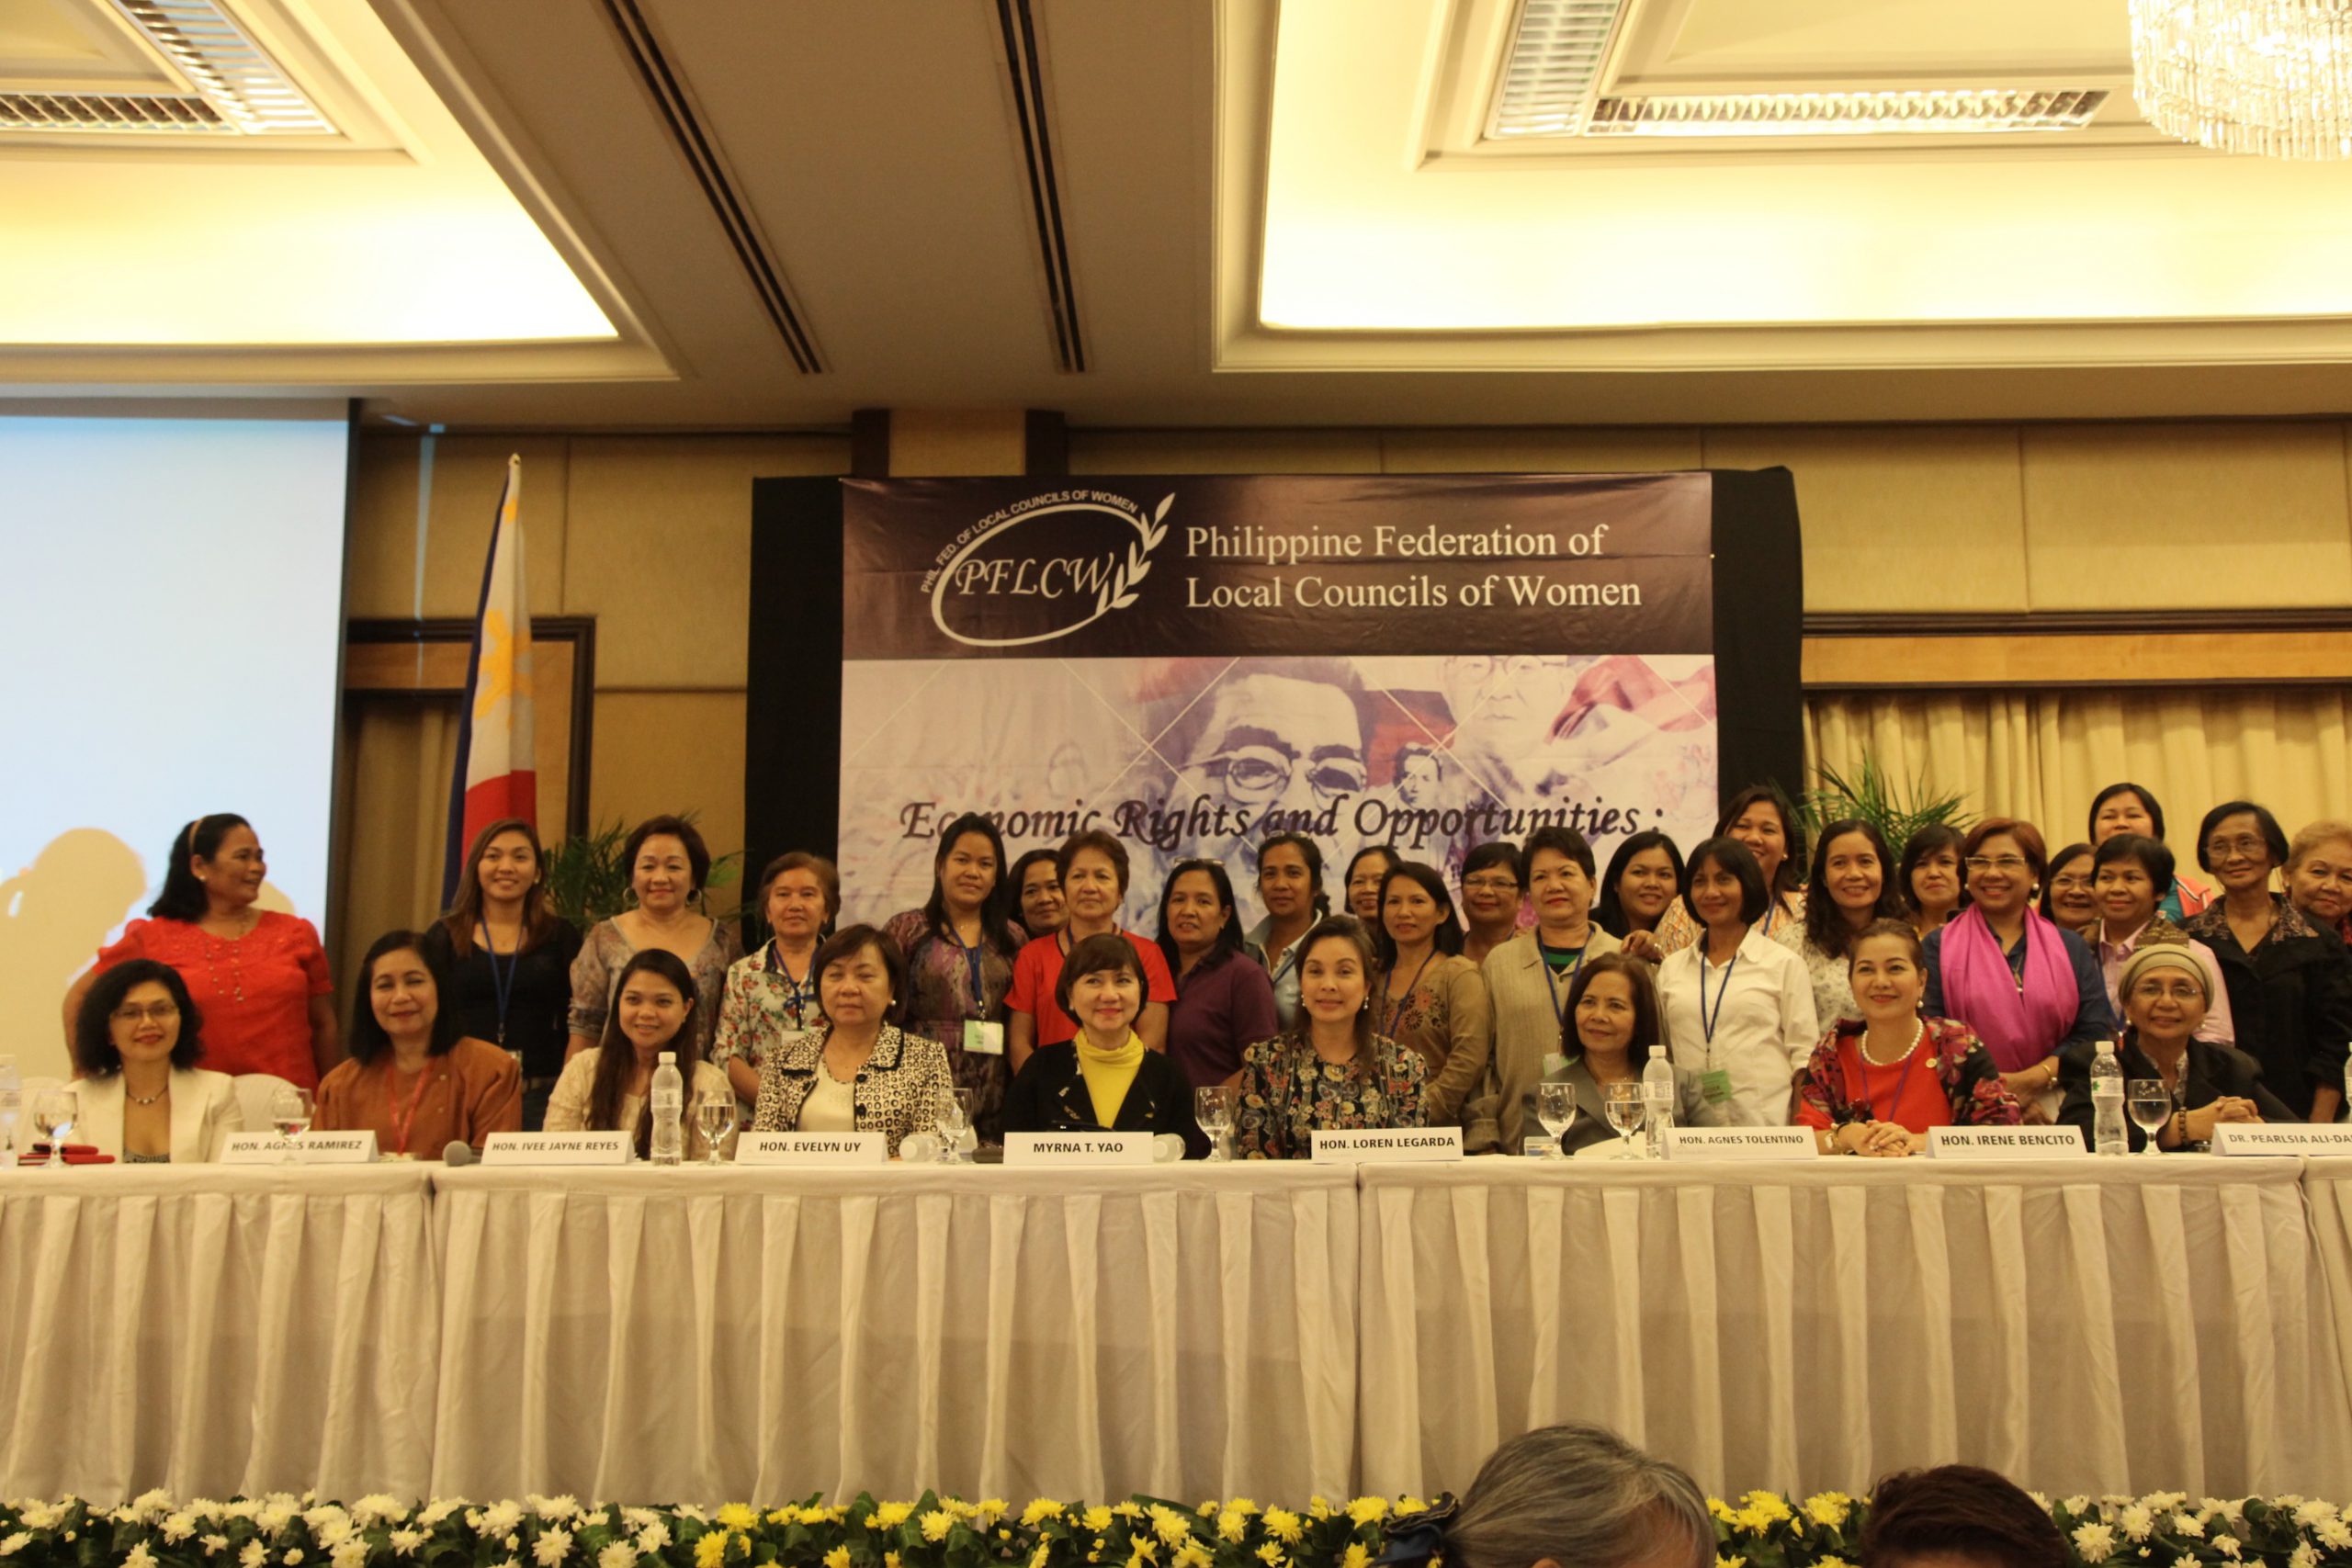 12th General Assembly of the Philippine Federation of Local Councils of Women (PFLCW)